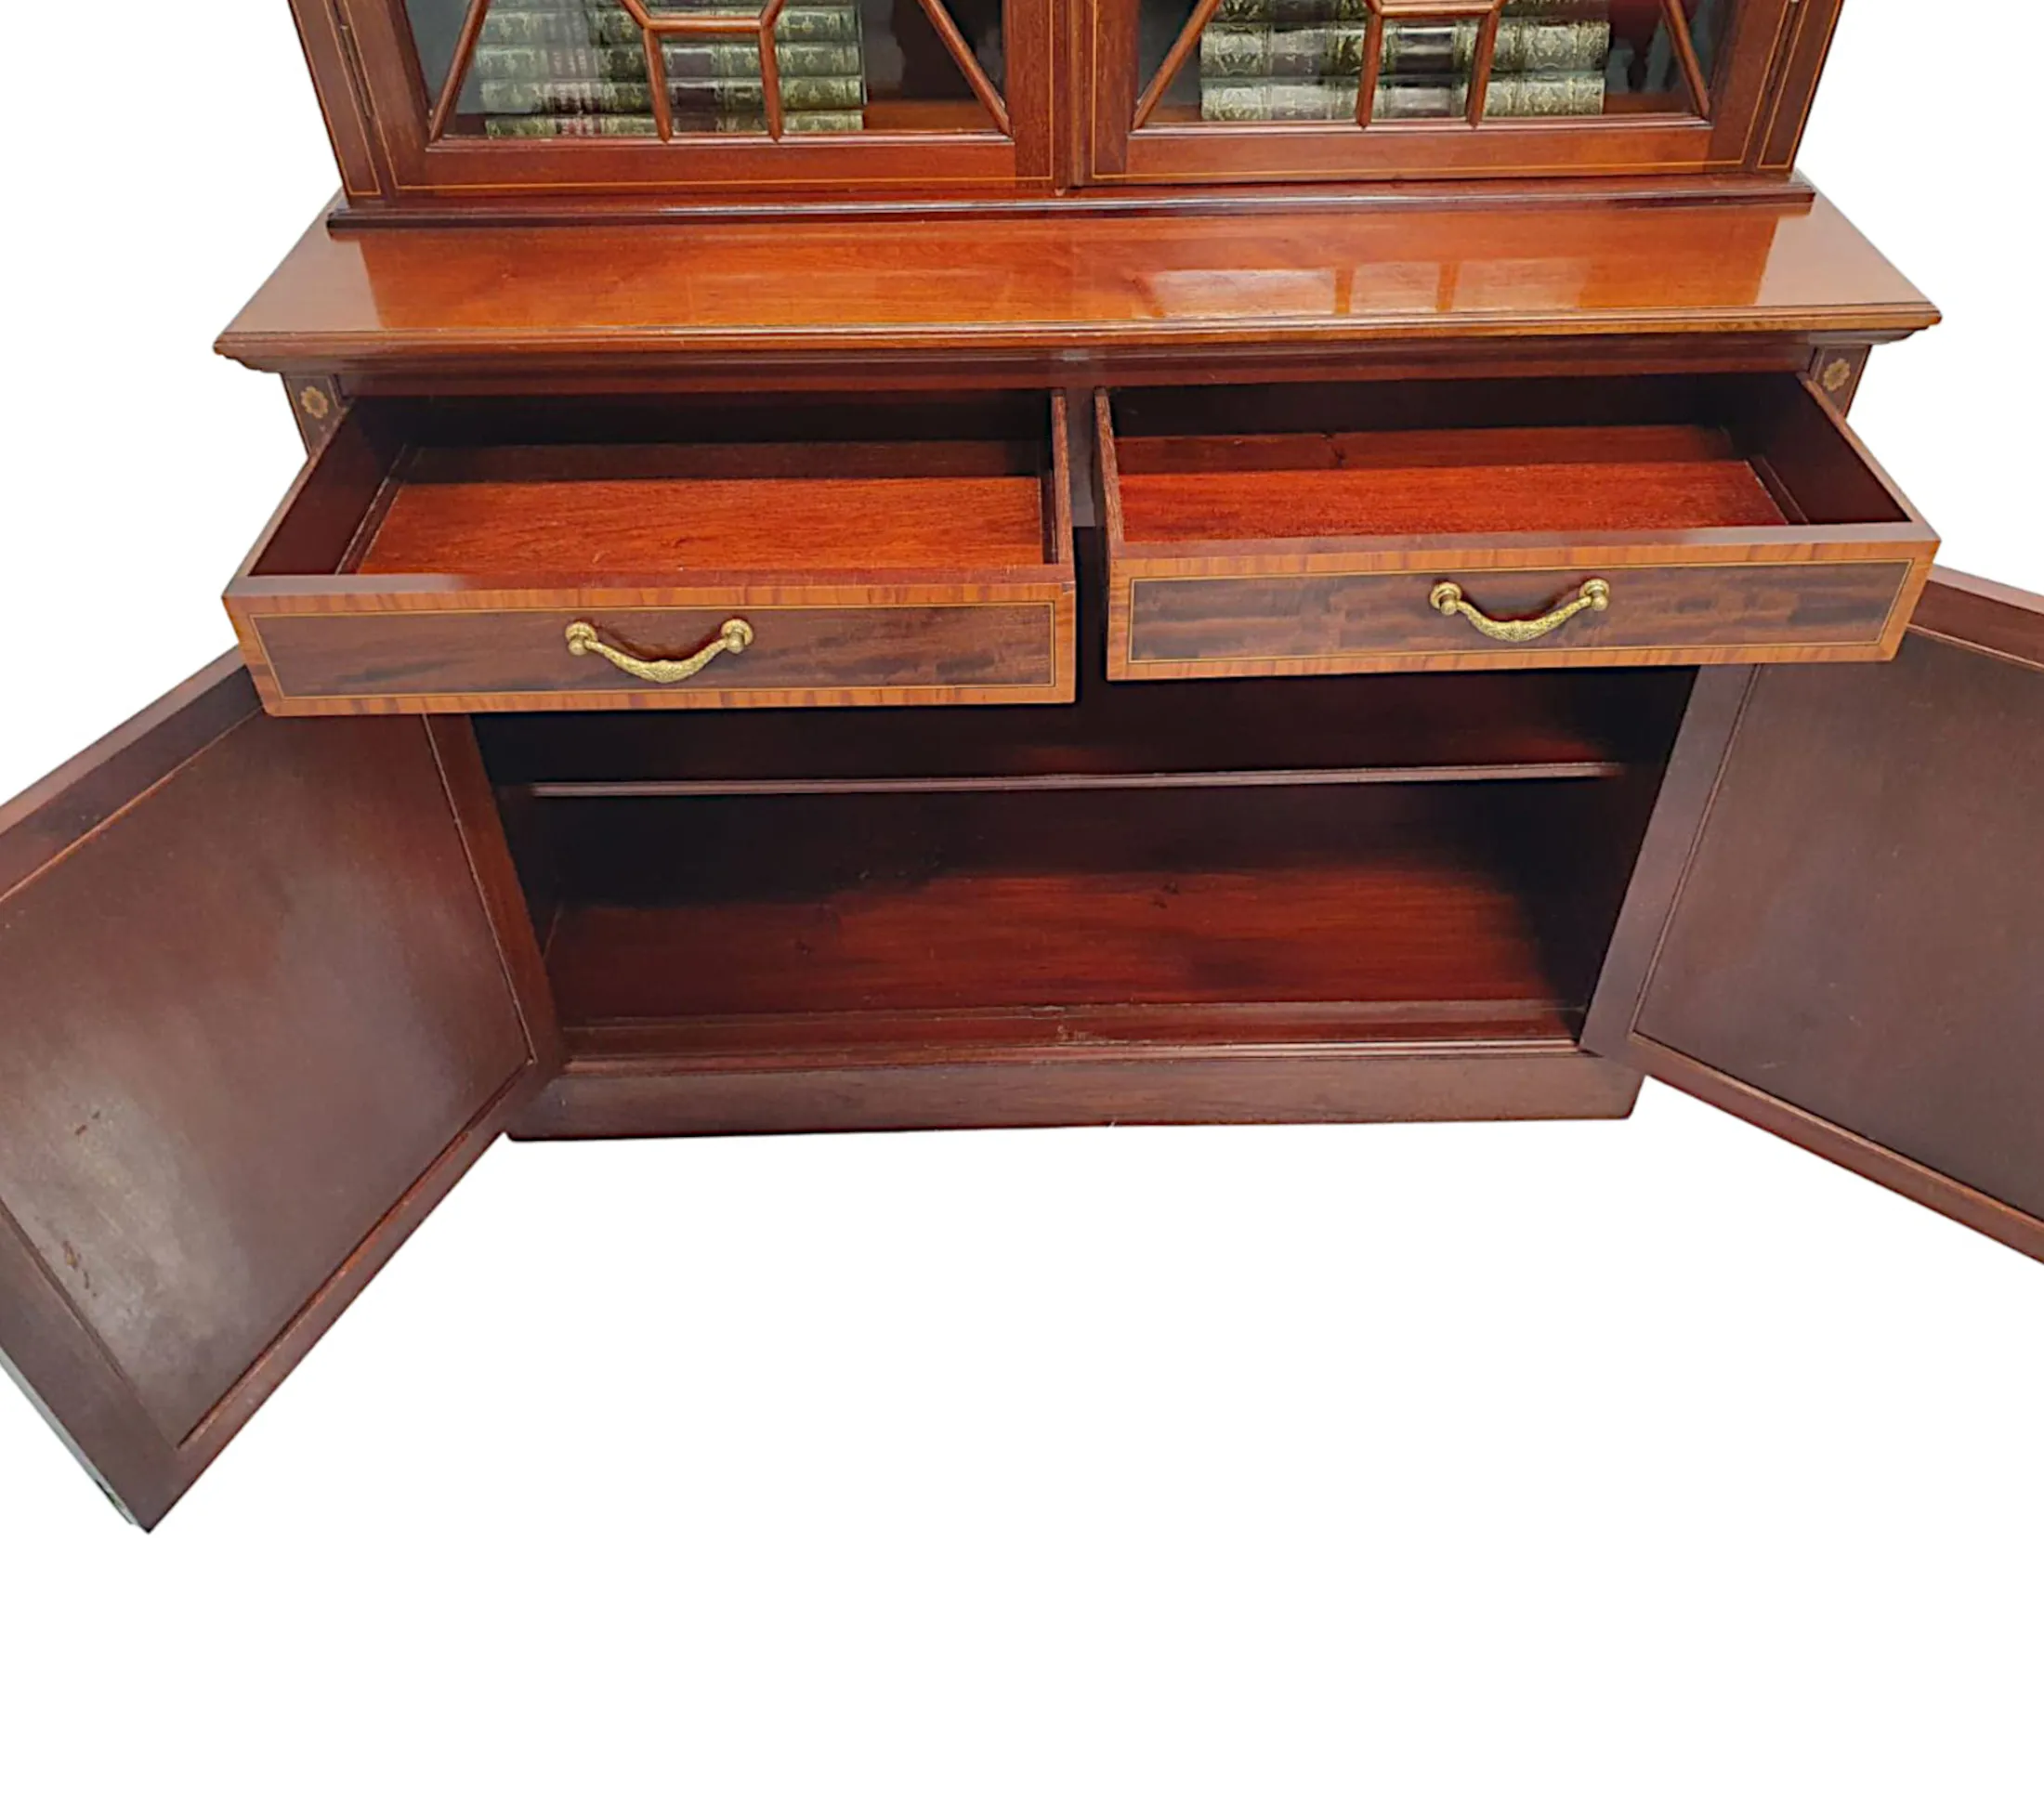  A Stunning Edwardian Inlaid Bookcase by S and H Jewell London